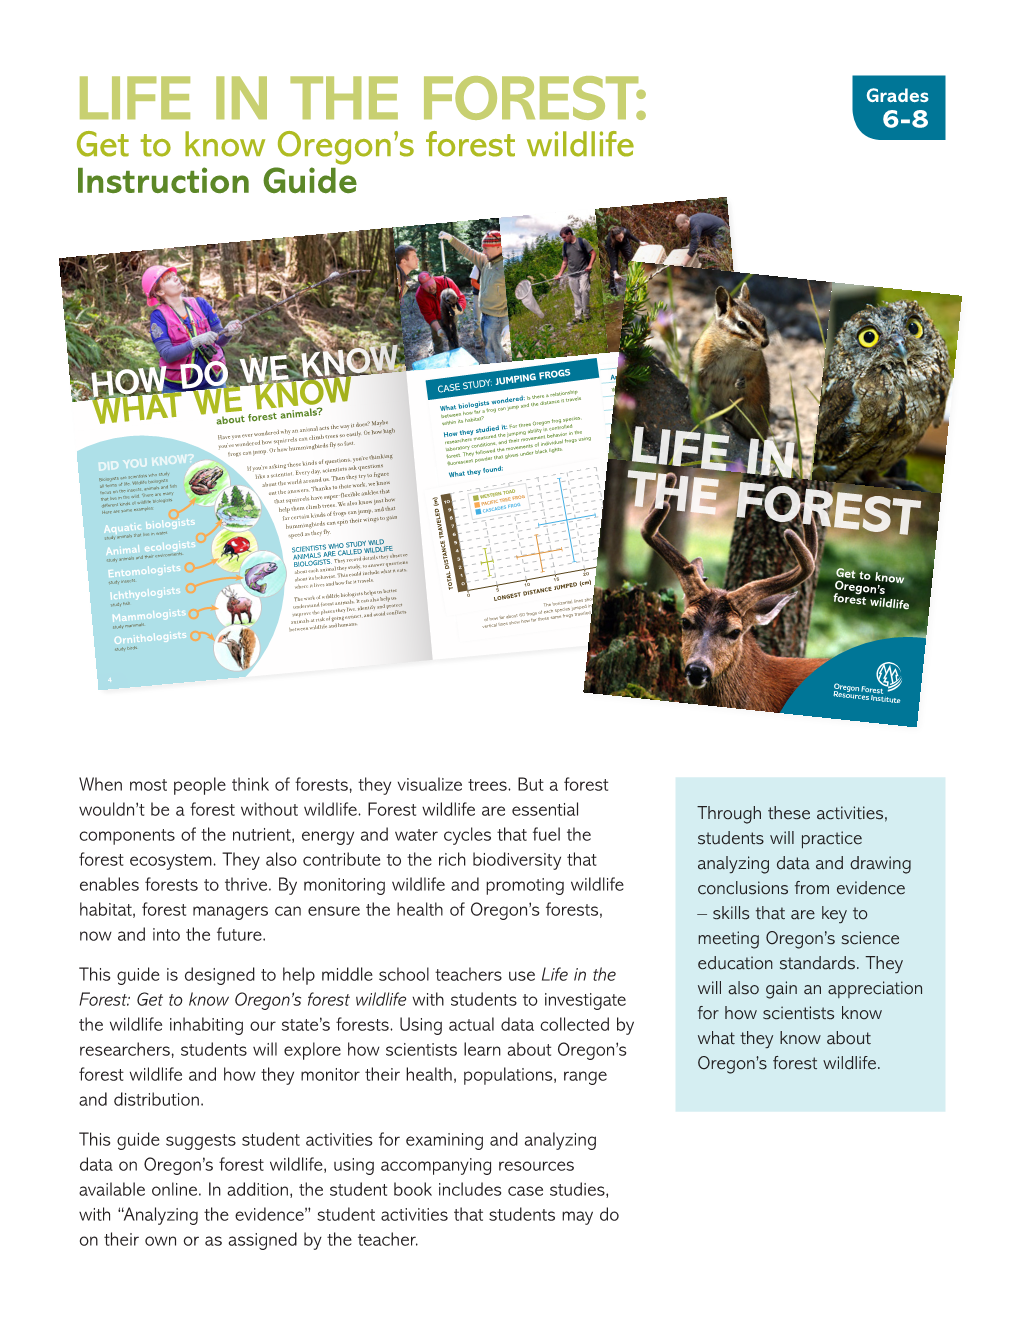 LIFE in the FOREST: 6-8 Get to Know Oregon’S Forest Wildlife Instruction Guide